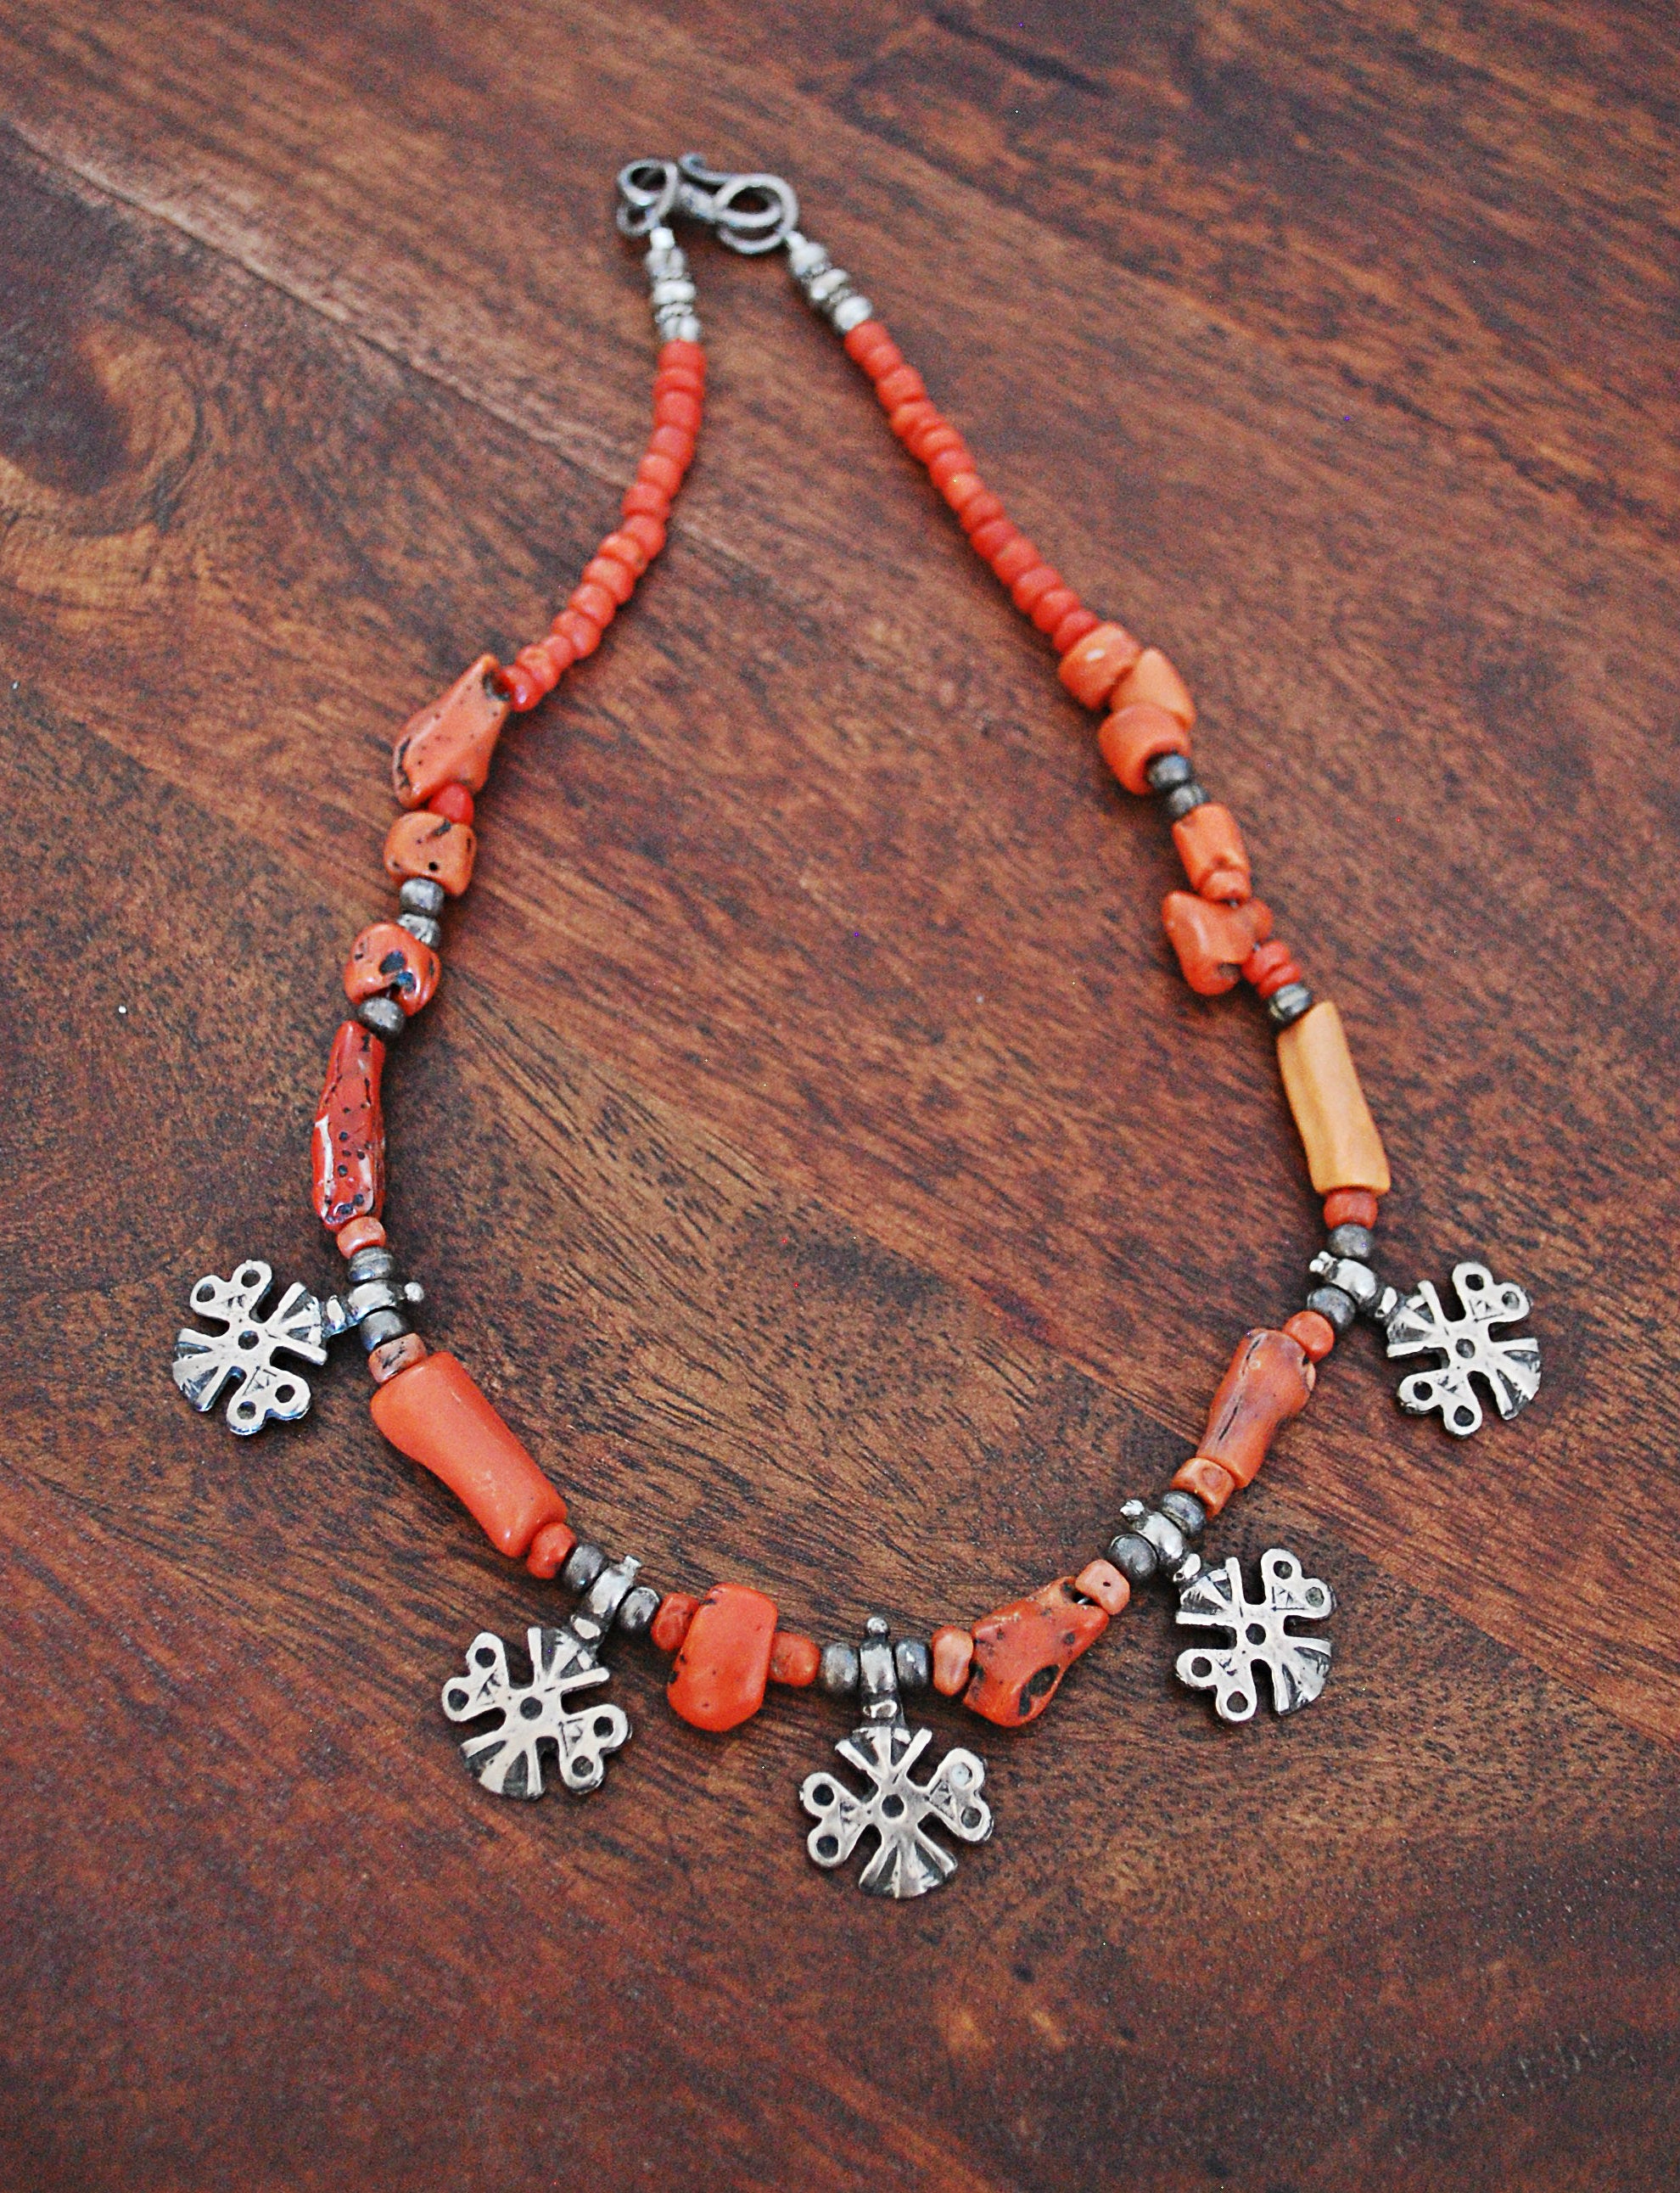 Berber Charms Coral Necklace with Silver Beads